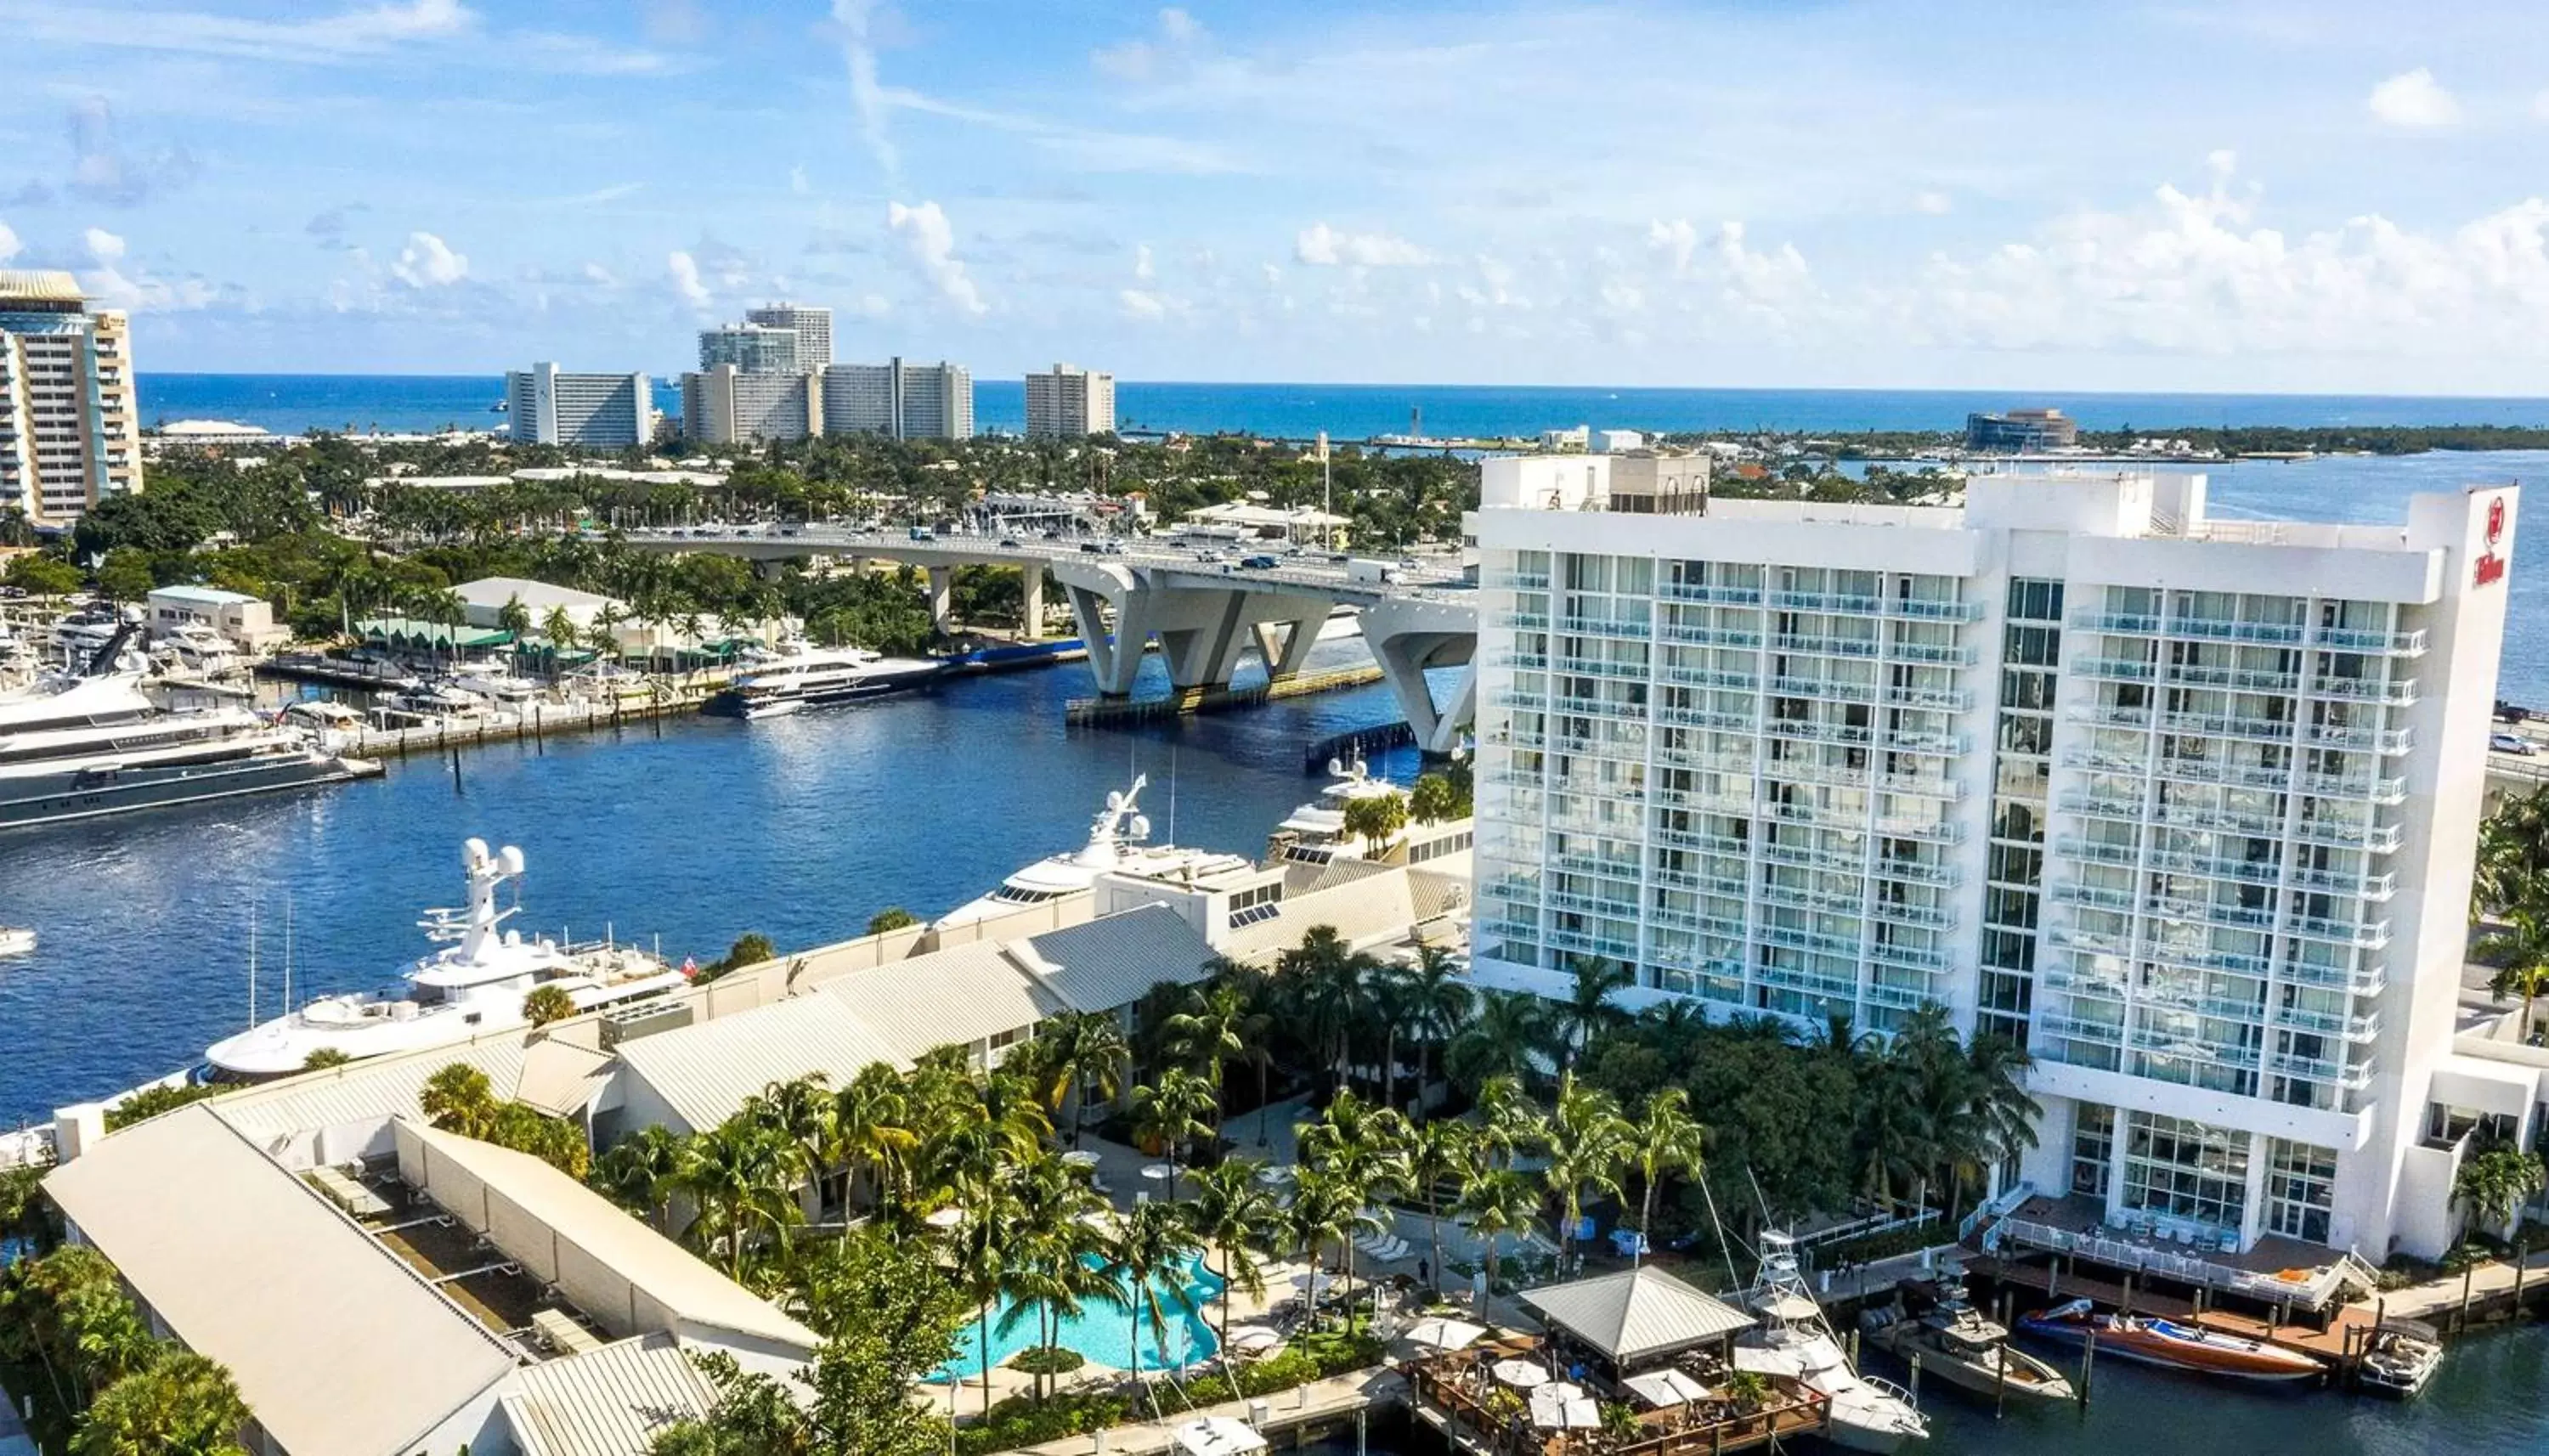 Property building in Hilton Fort Lauderdale Marina